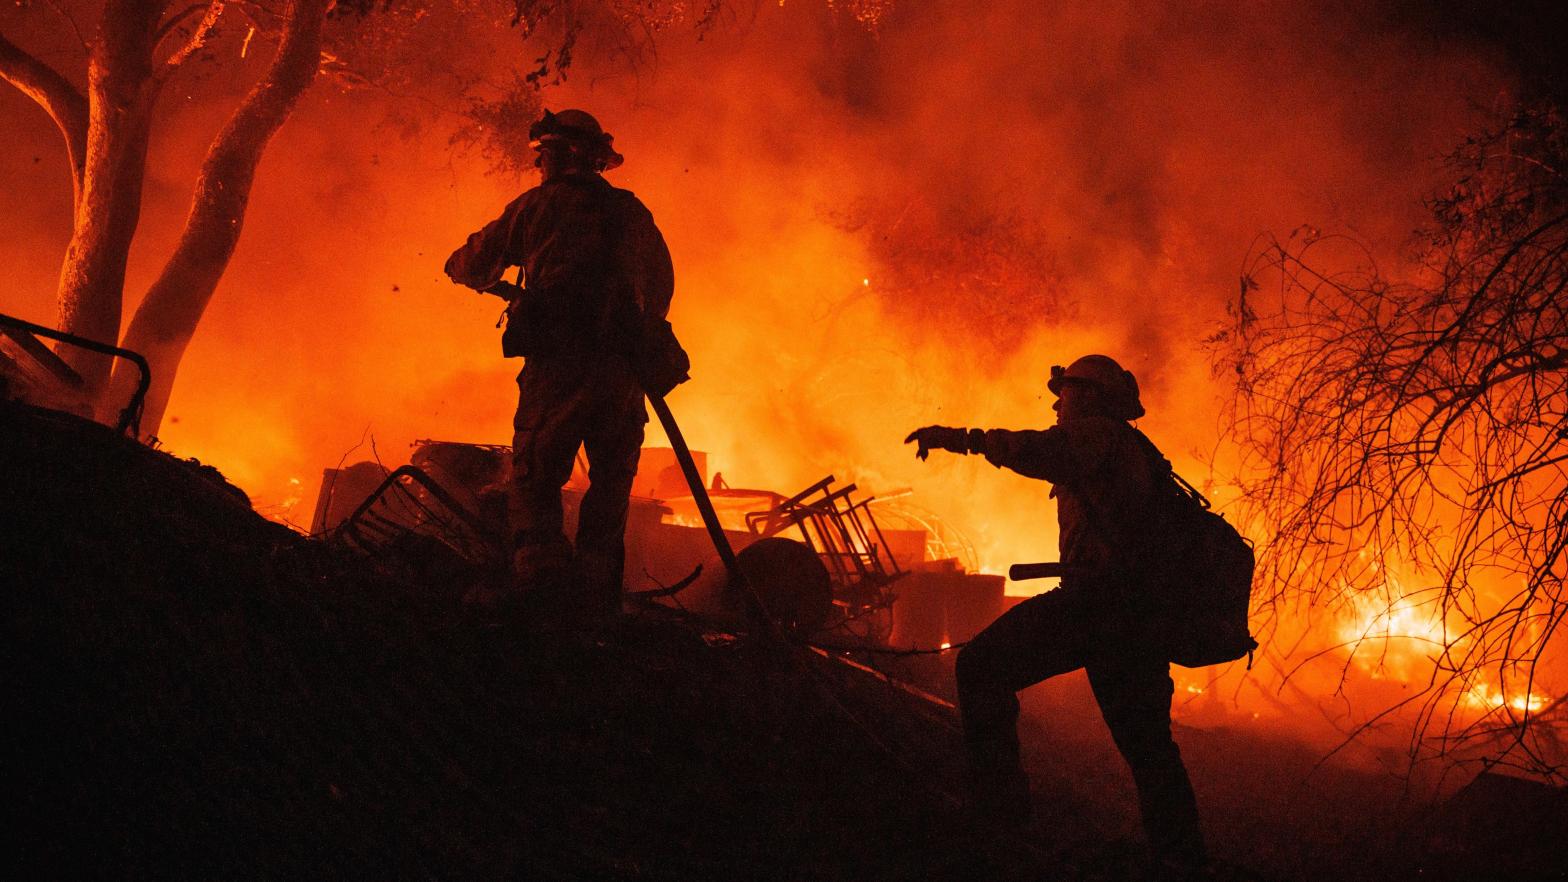 Firefighters coordinate efforts at a burning property while battling the Fairview Fire on Monday, Sept. 5, 2022, near Hemet, California.  (Photo: Ethan Swope, AP)